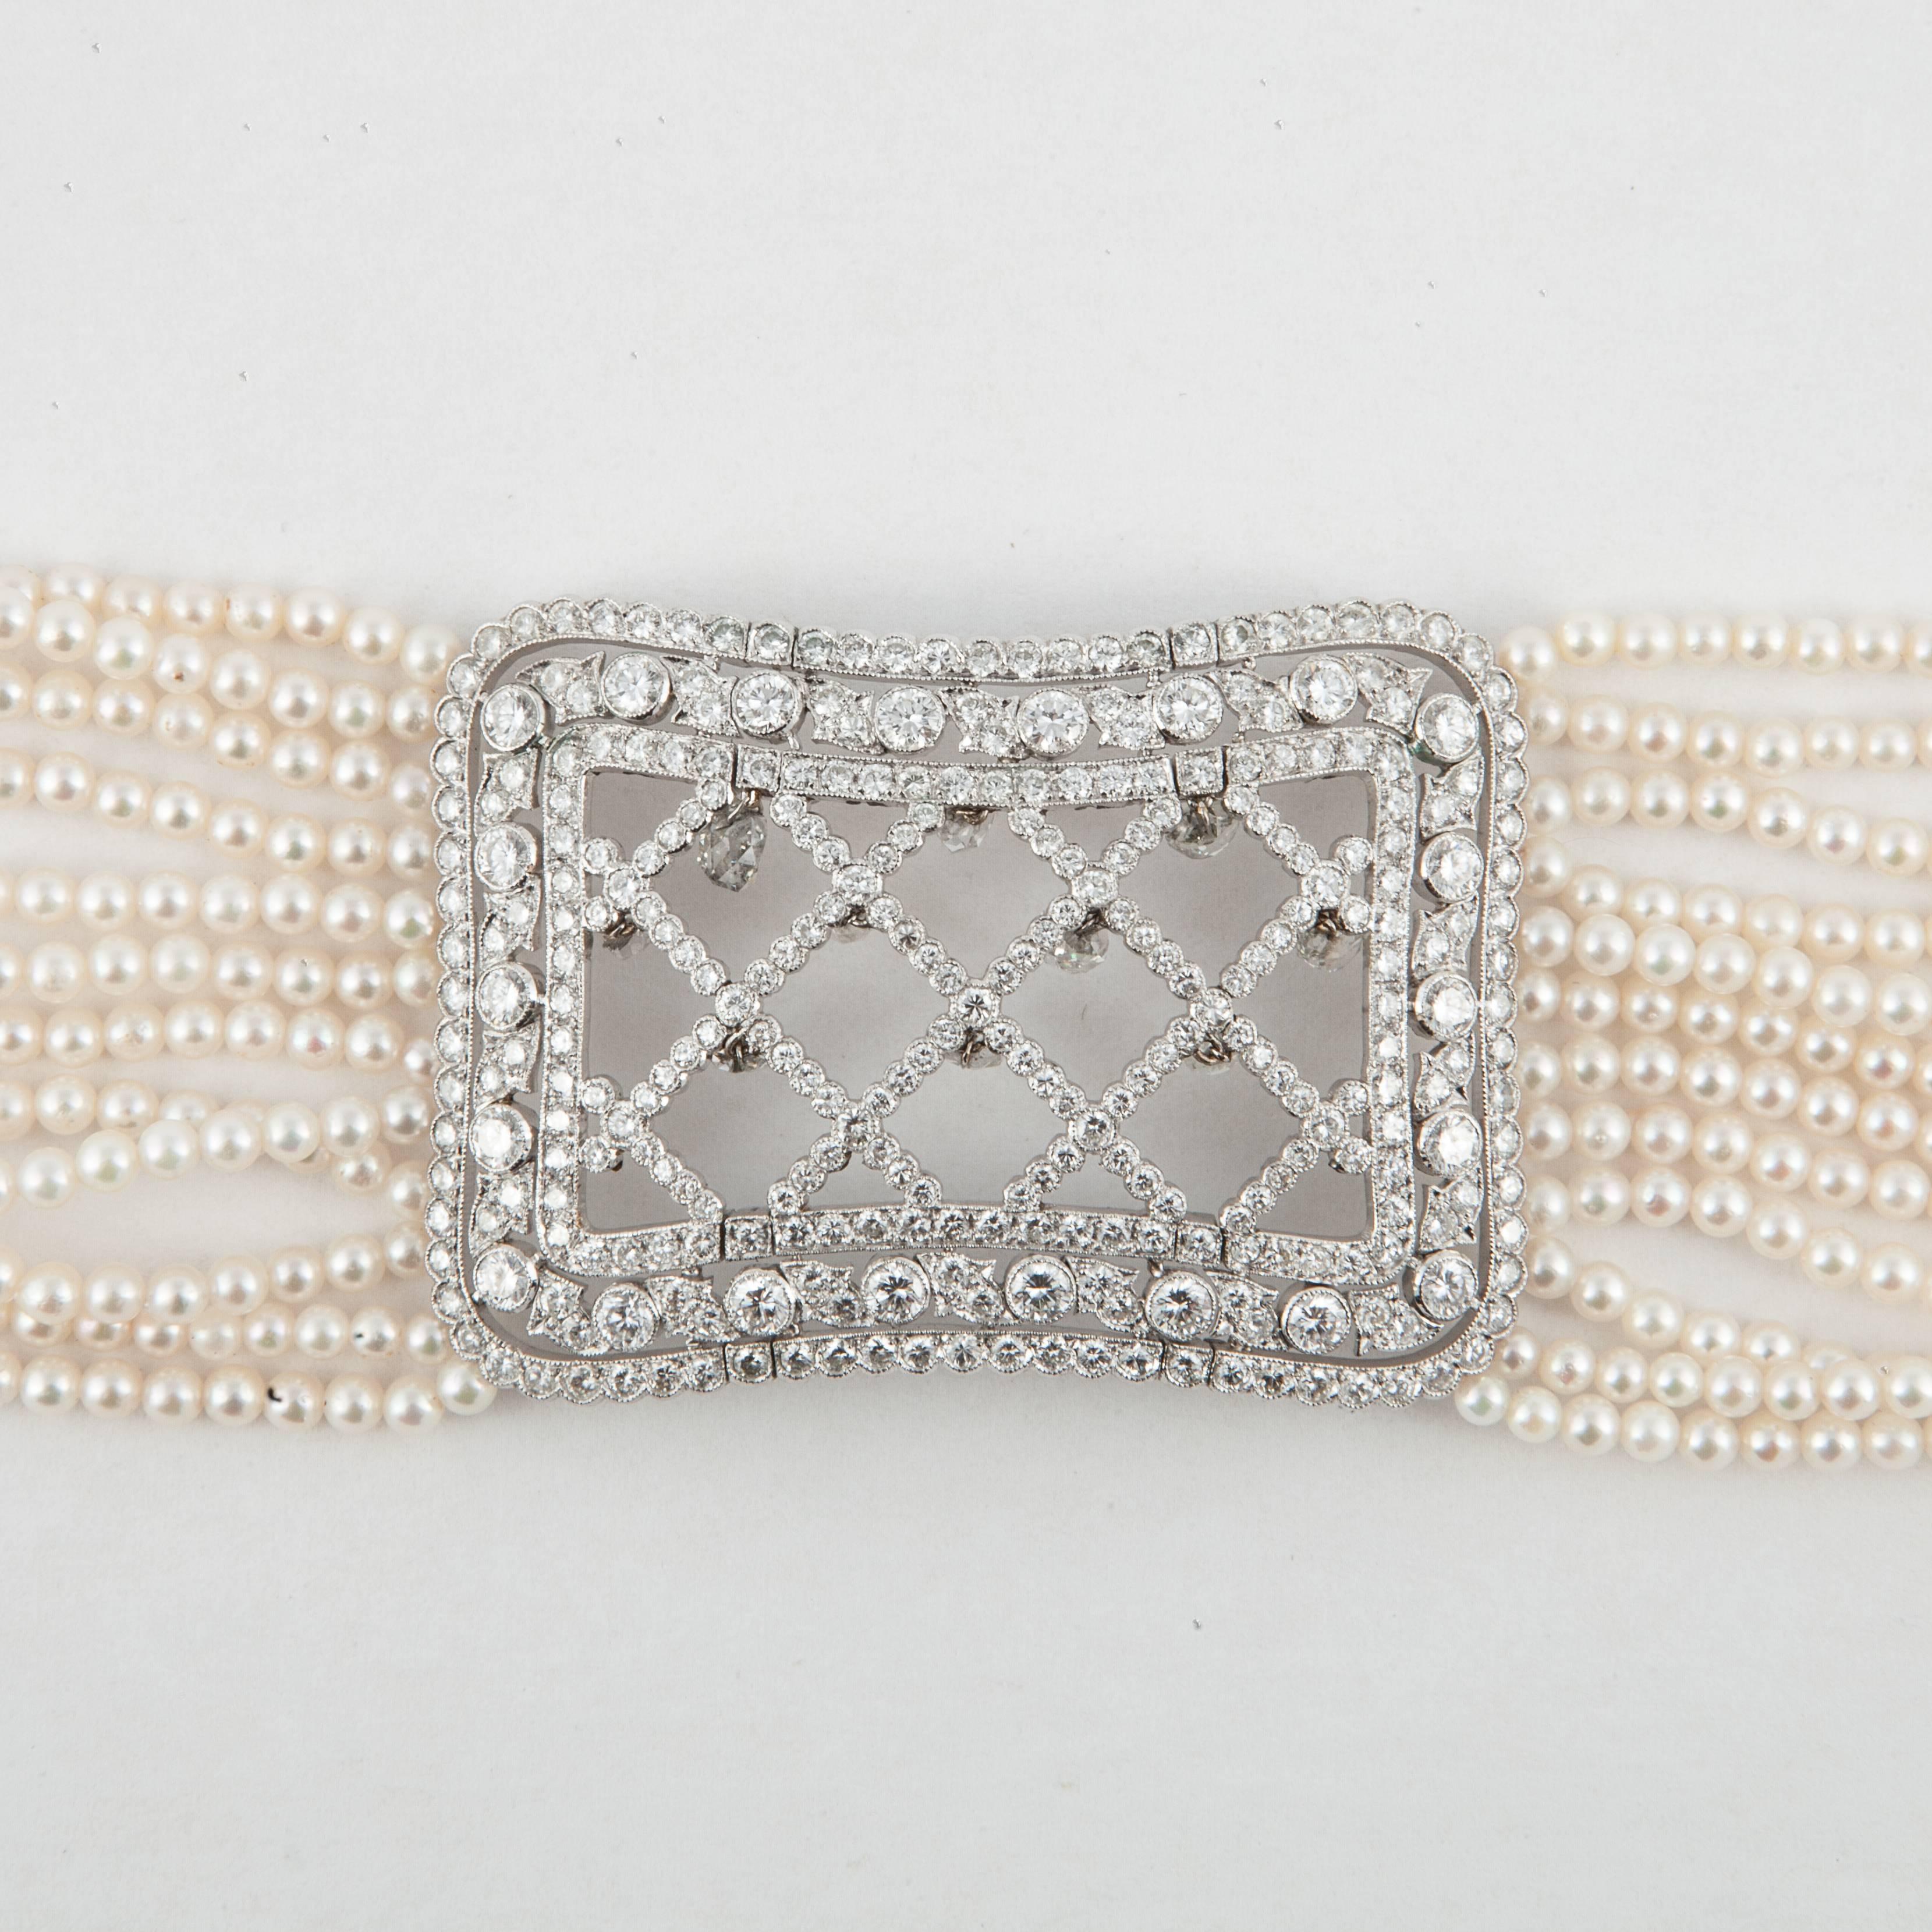 Collar necklace consists of twelve strands of small seed pearls with a diamond plaque in the center.  There are ten briolette diamonds dangling from the central plaque and a total of 409 round brilliant-cut diamonds, totaling 16.50 carats, G-I color